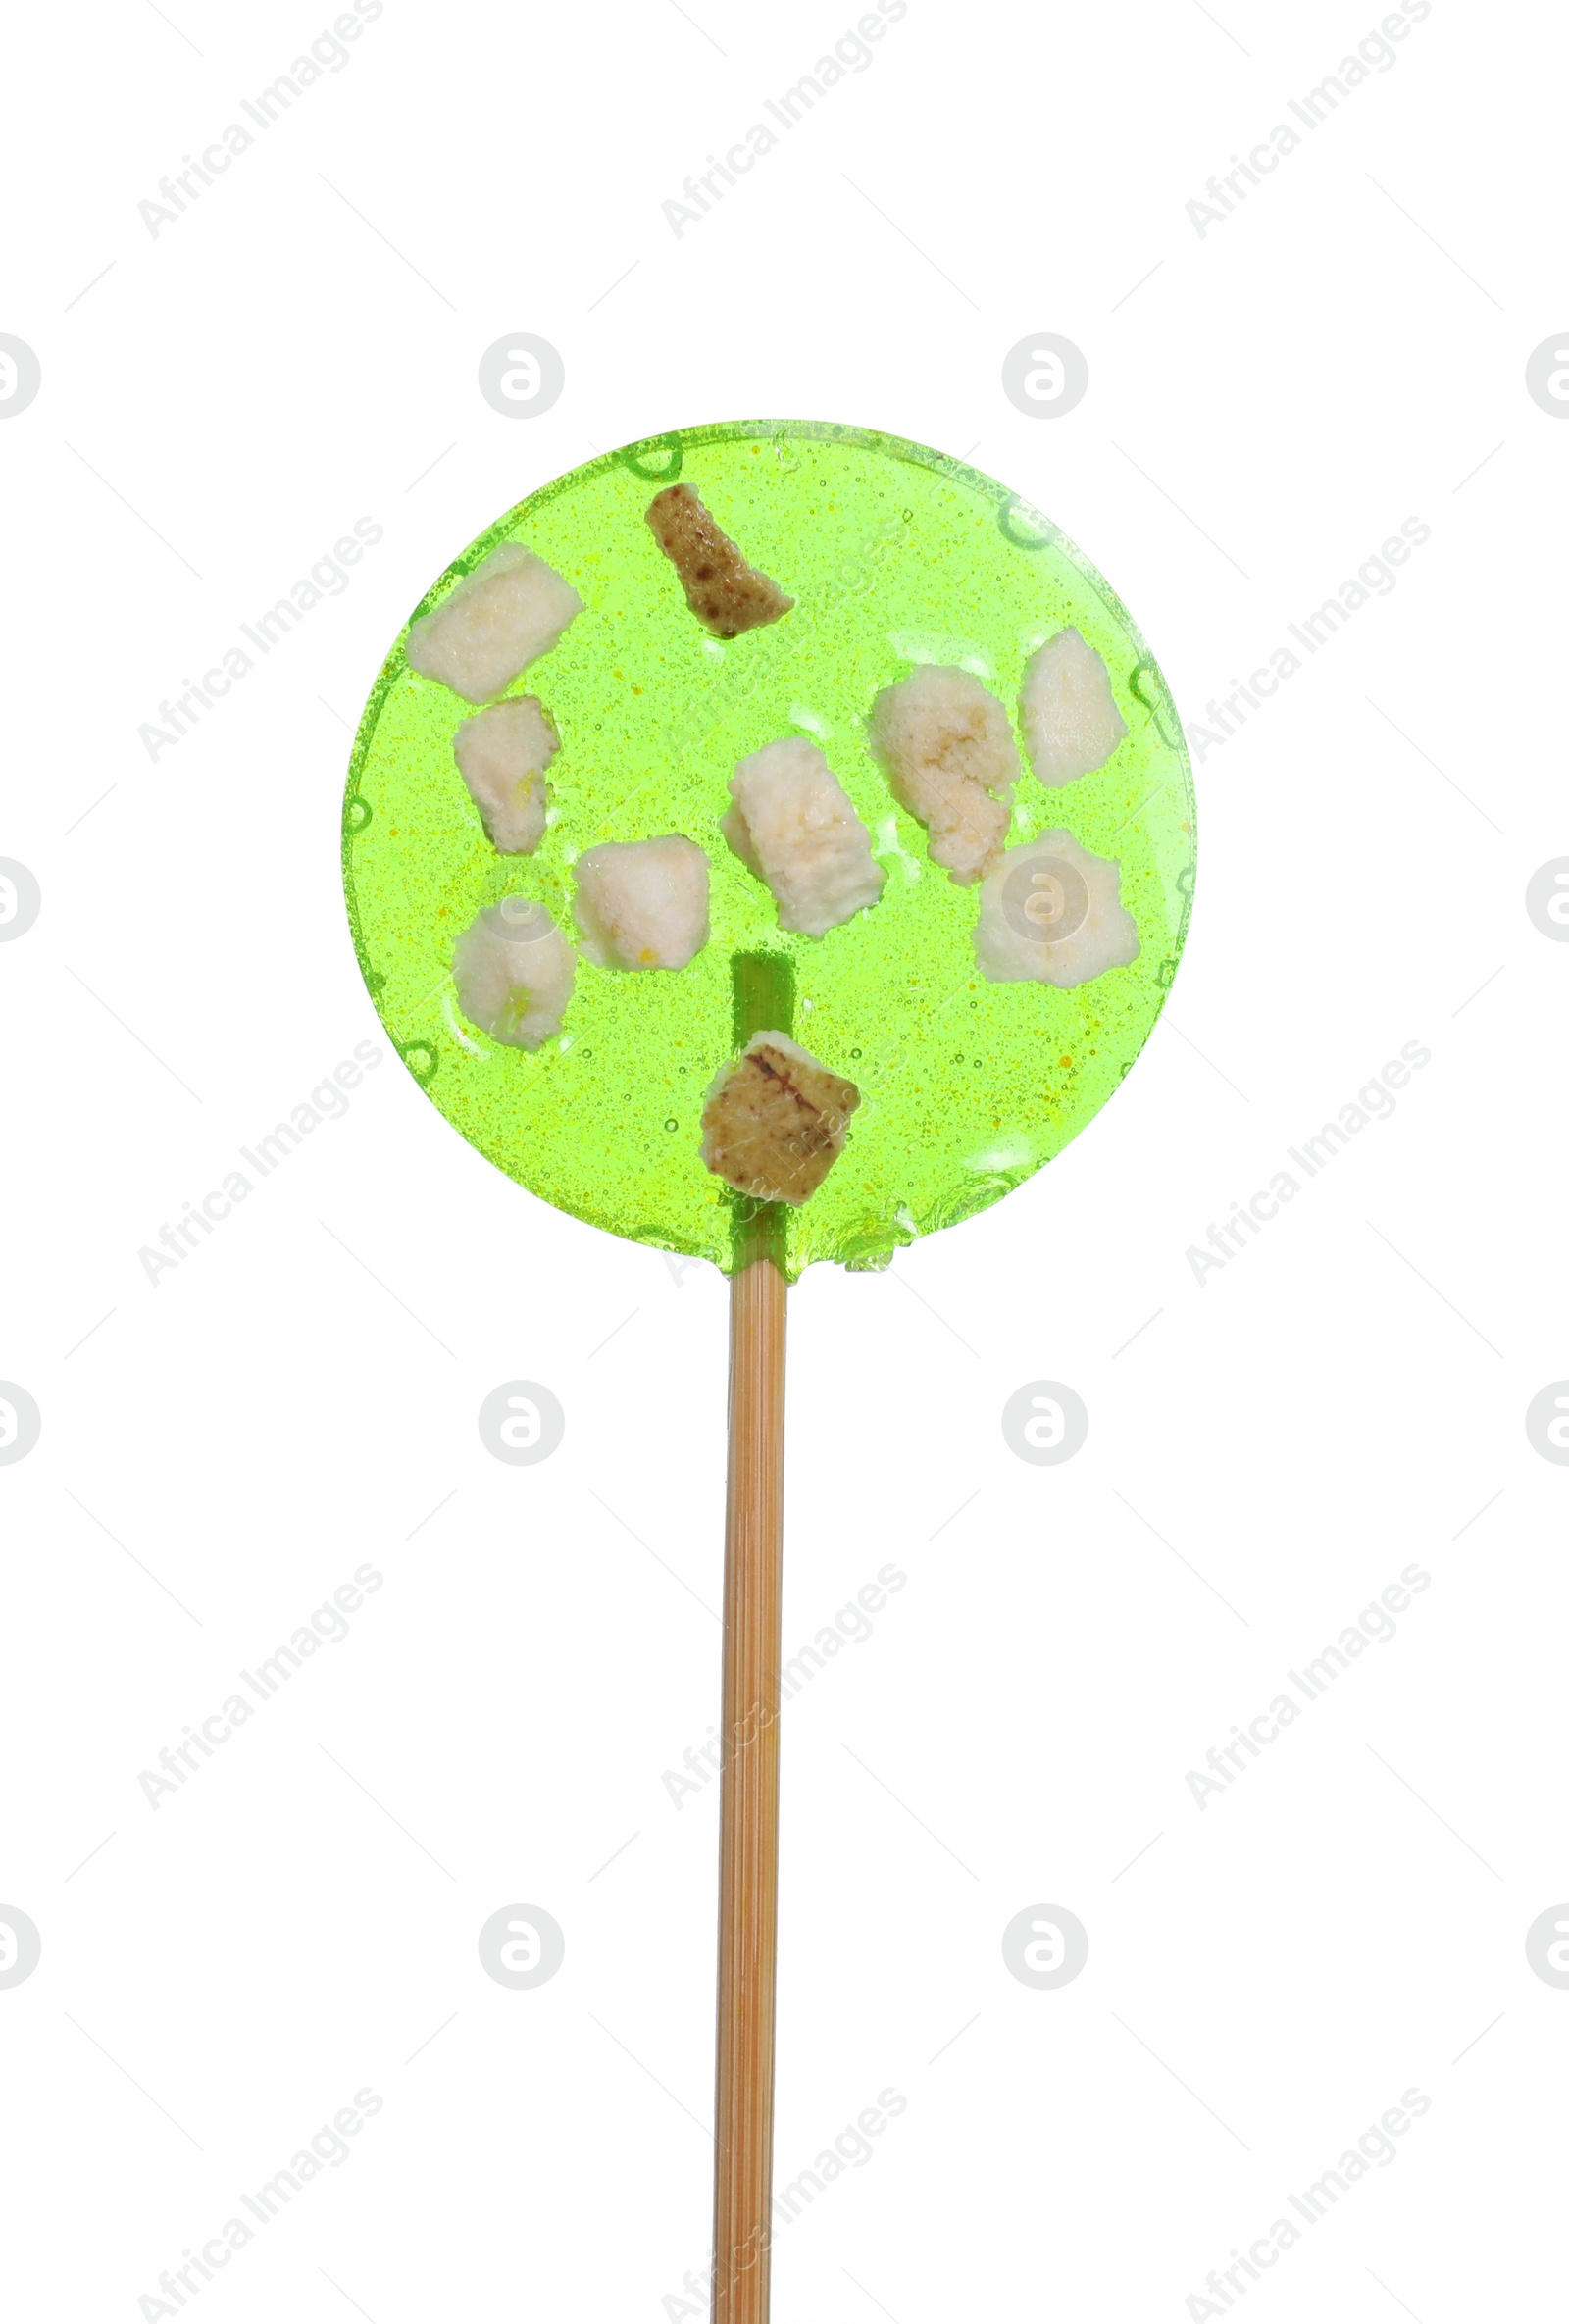 Photo of Stick with light green lollipop isolated on white